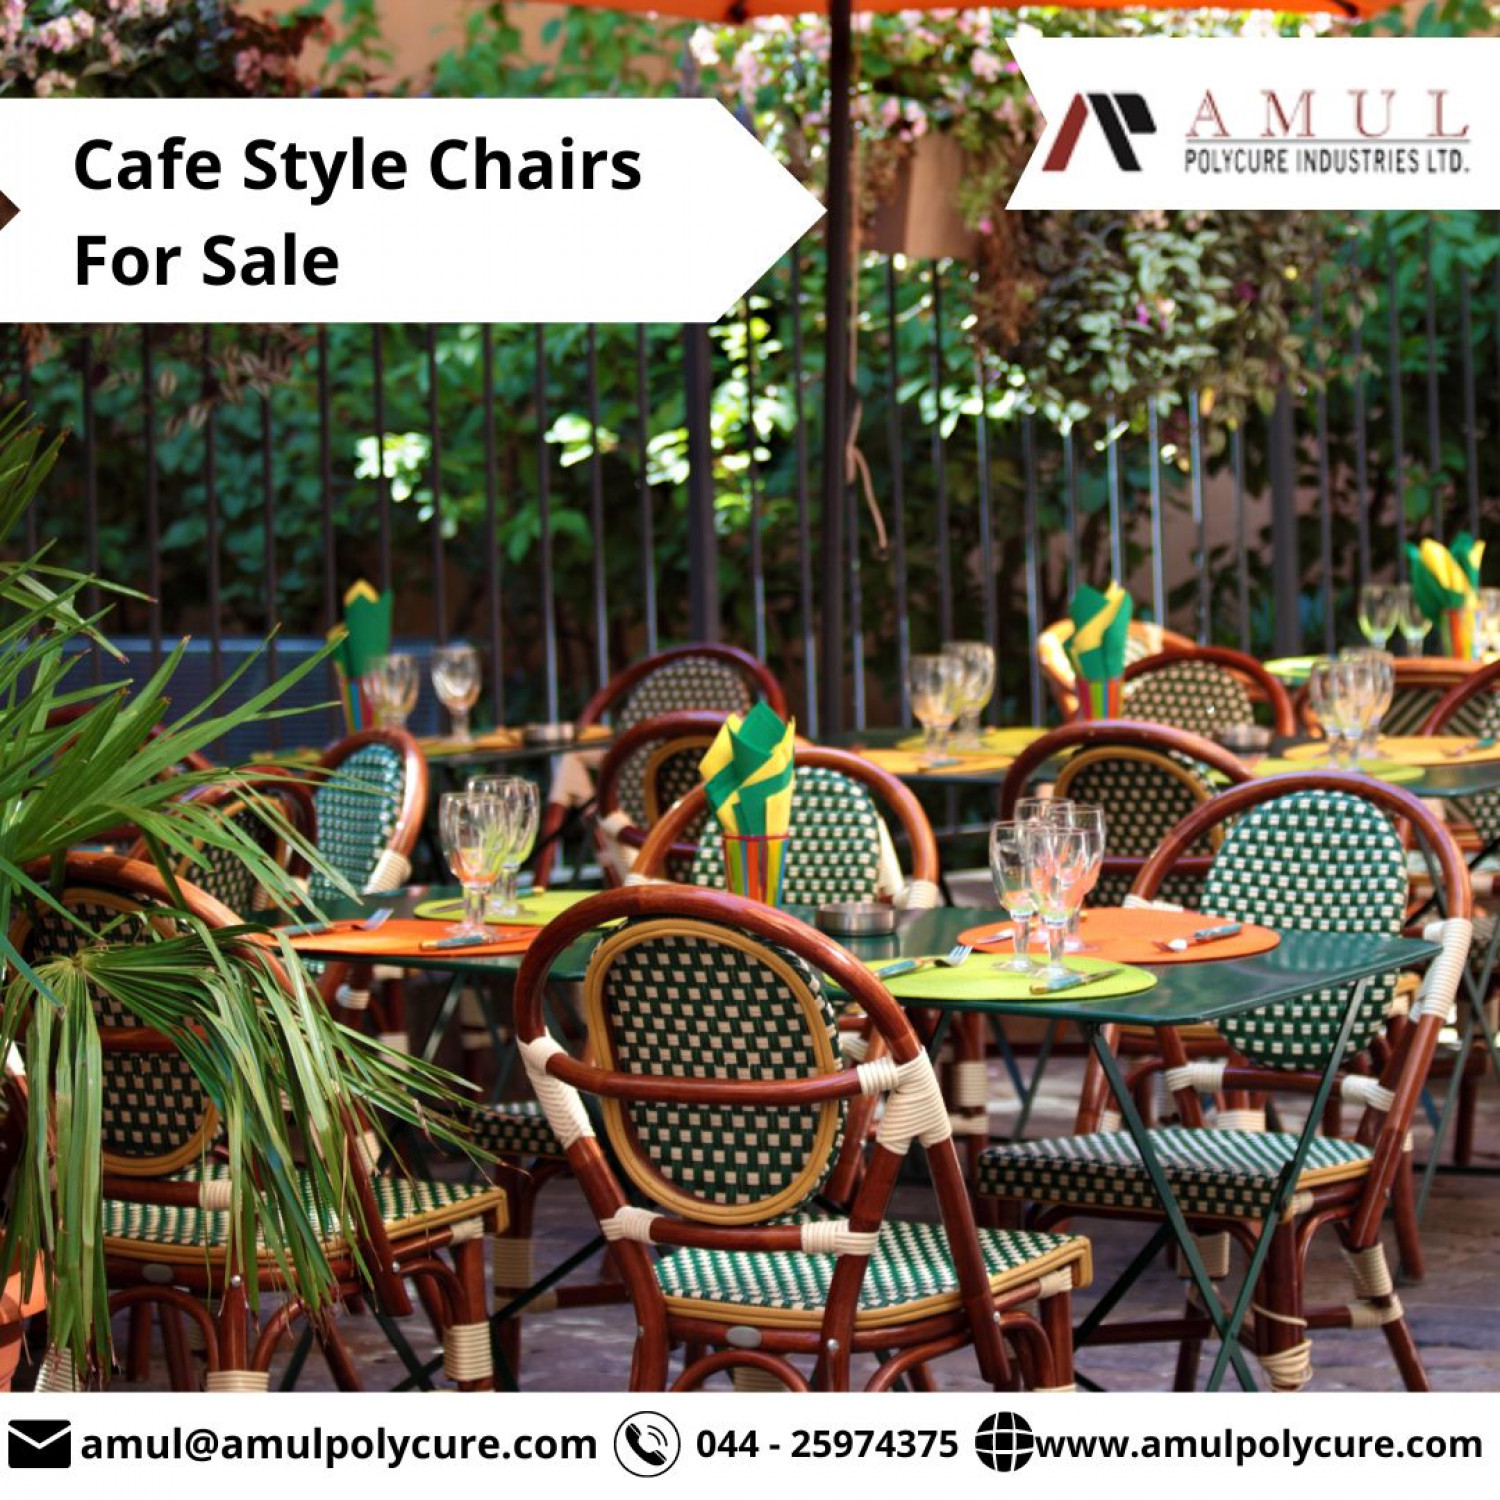 cafeteria chairs manufacturers in Chennai | cafe style chairs for sale - Amul Polycure Infographic